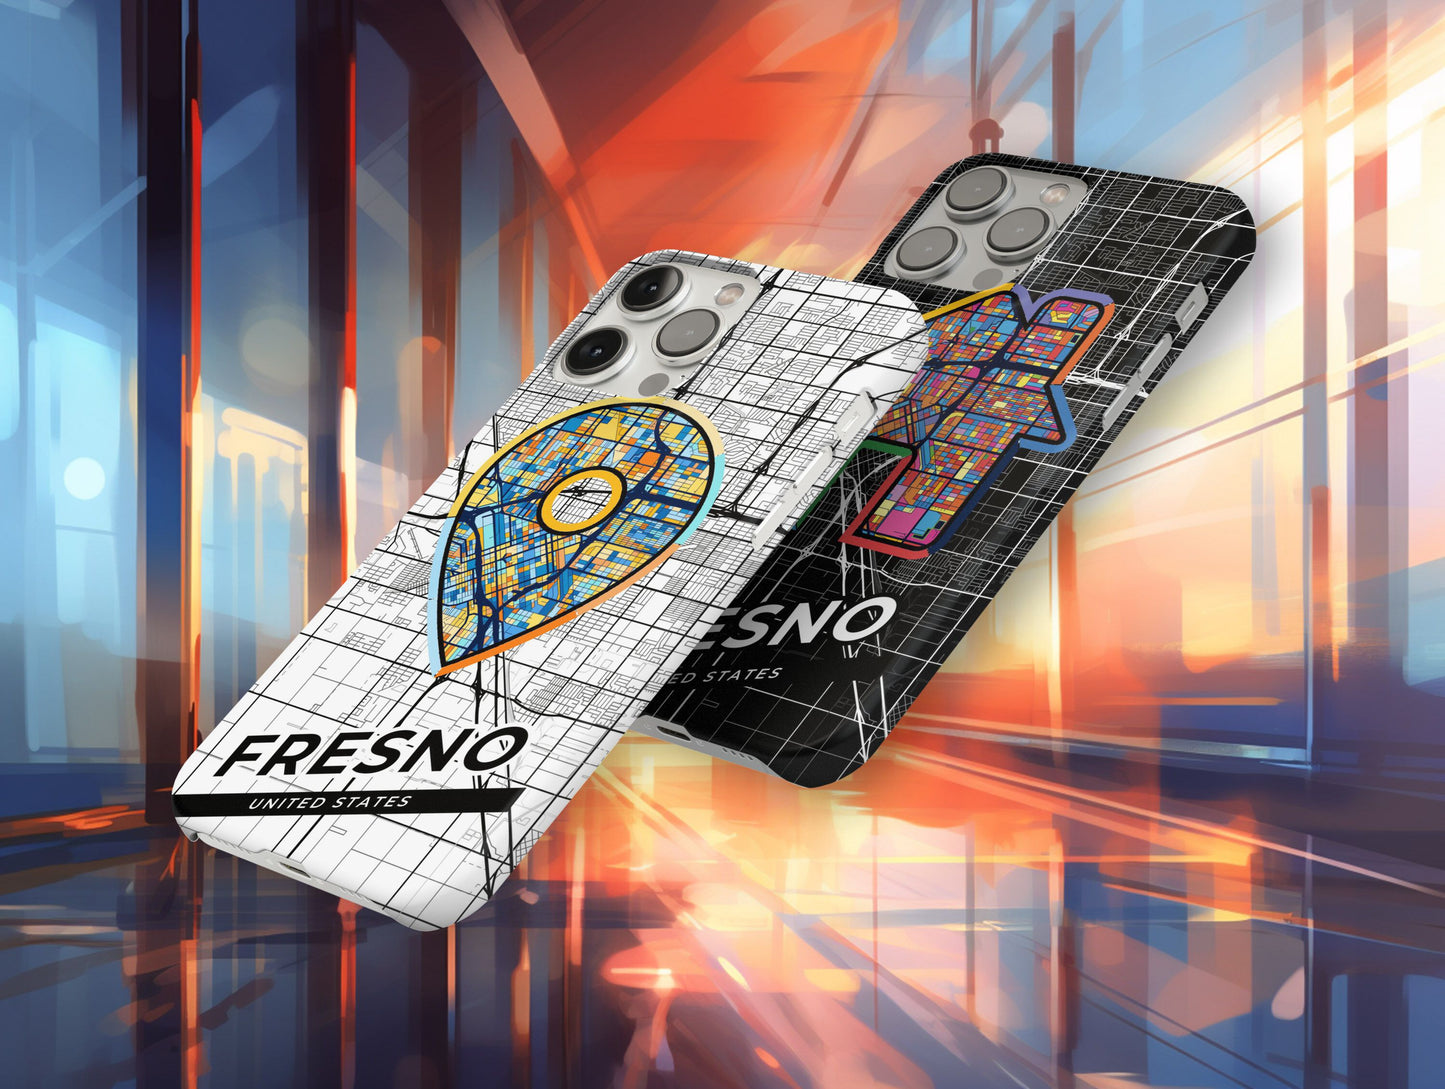 Fresno California slim phone case with colorful icon. Birthday, wedding or housewarming gift. Couple match cases.